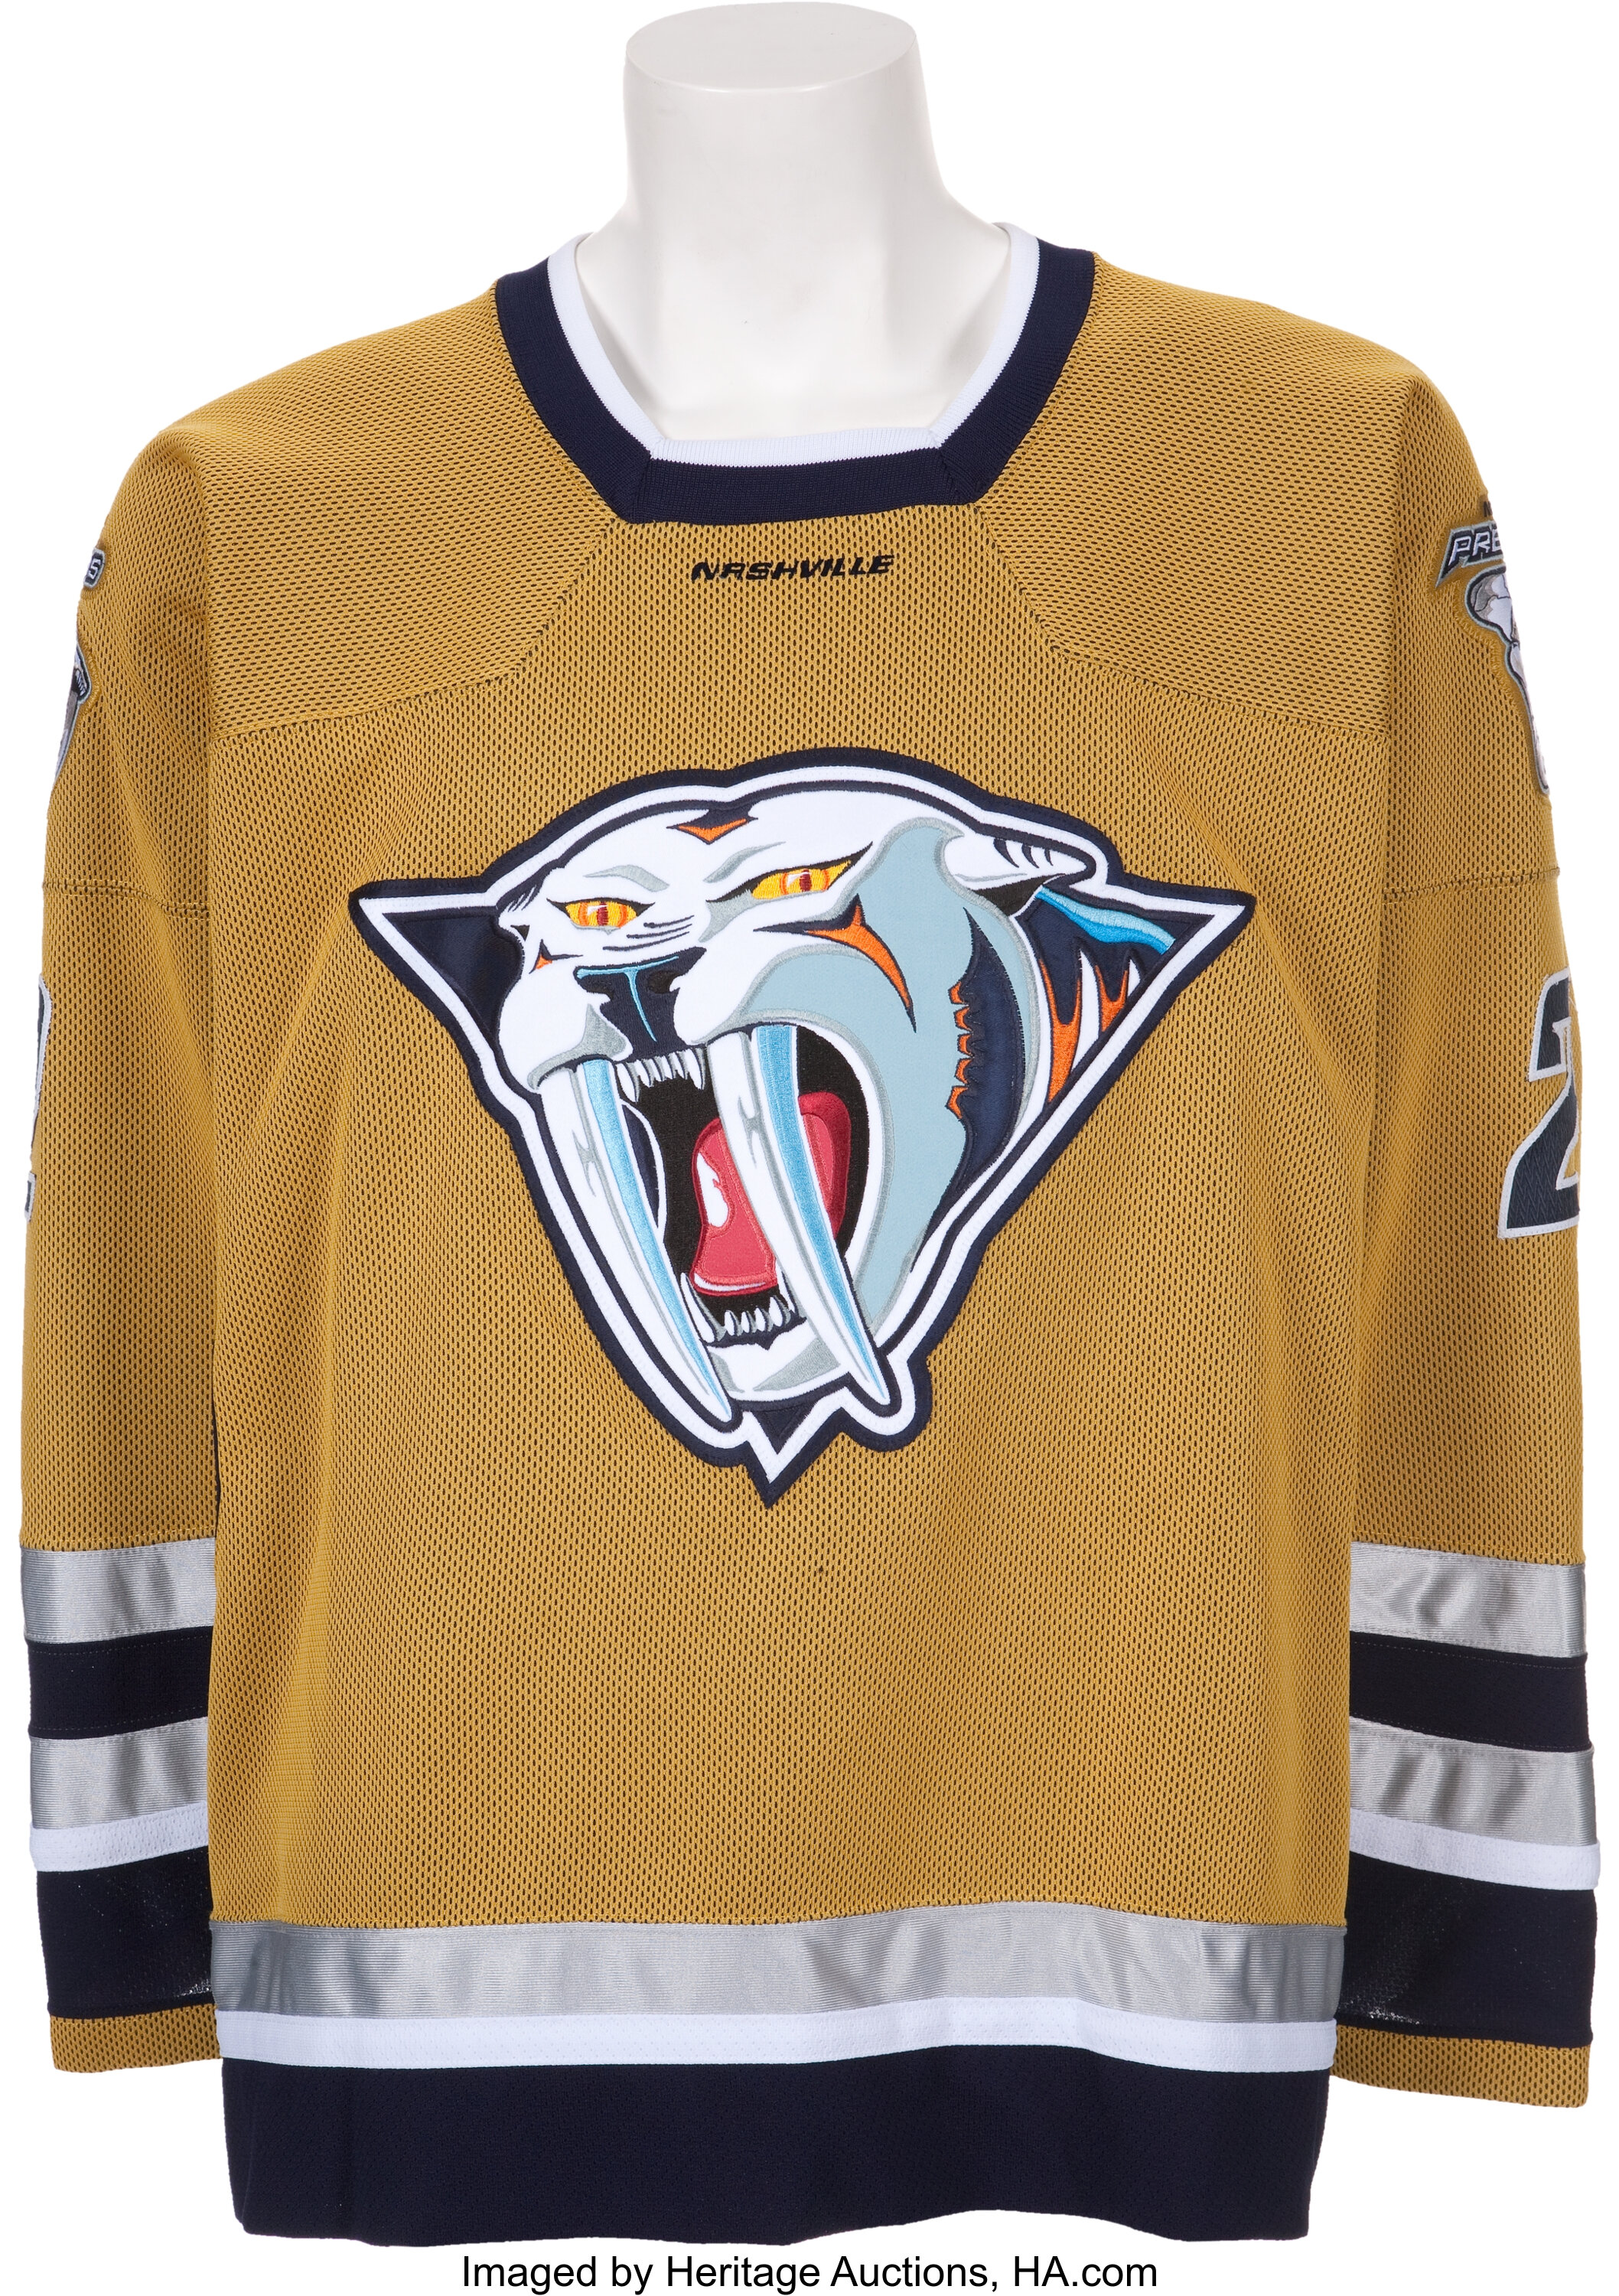 Preds Foundation to Auction Game-Worn Jerseys to Benefit Covenant